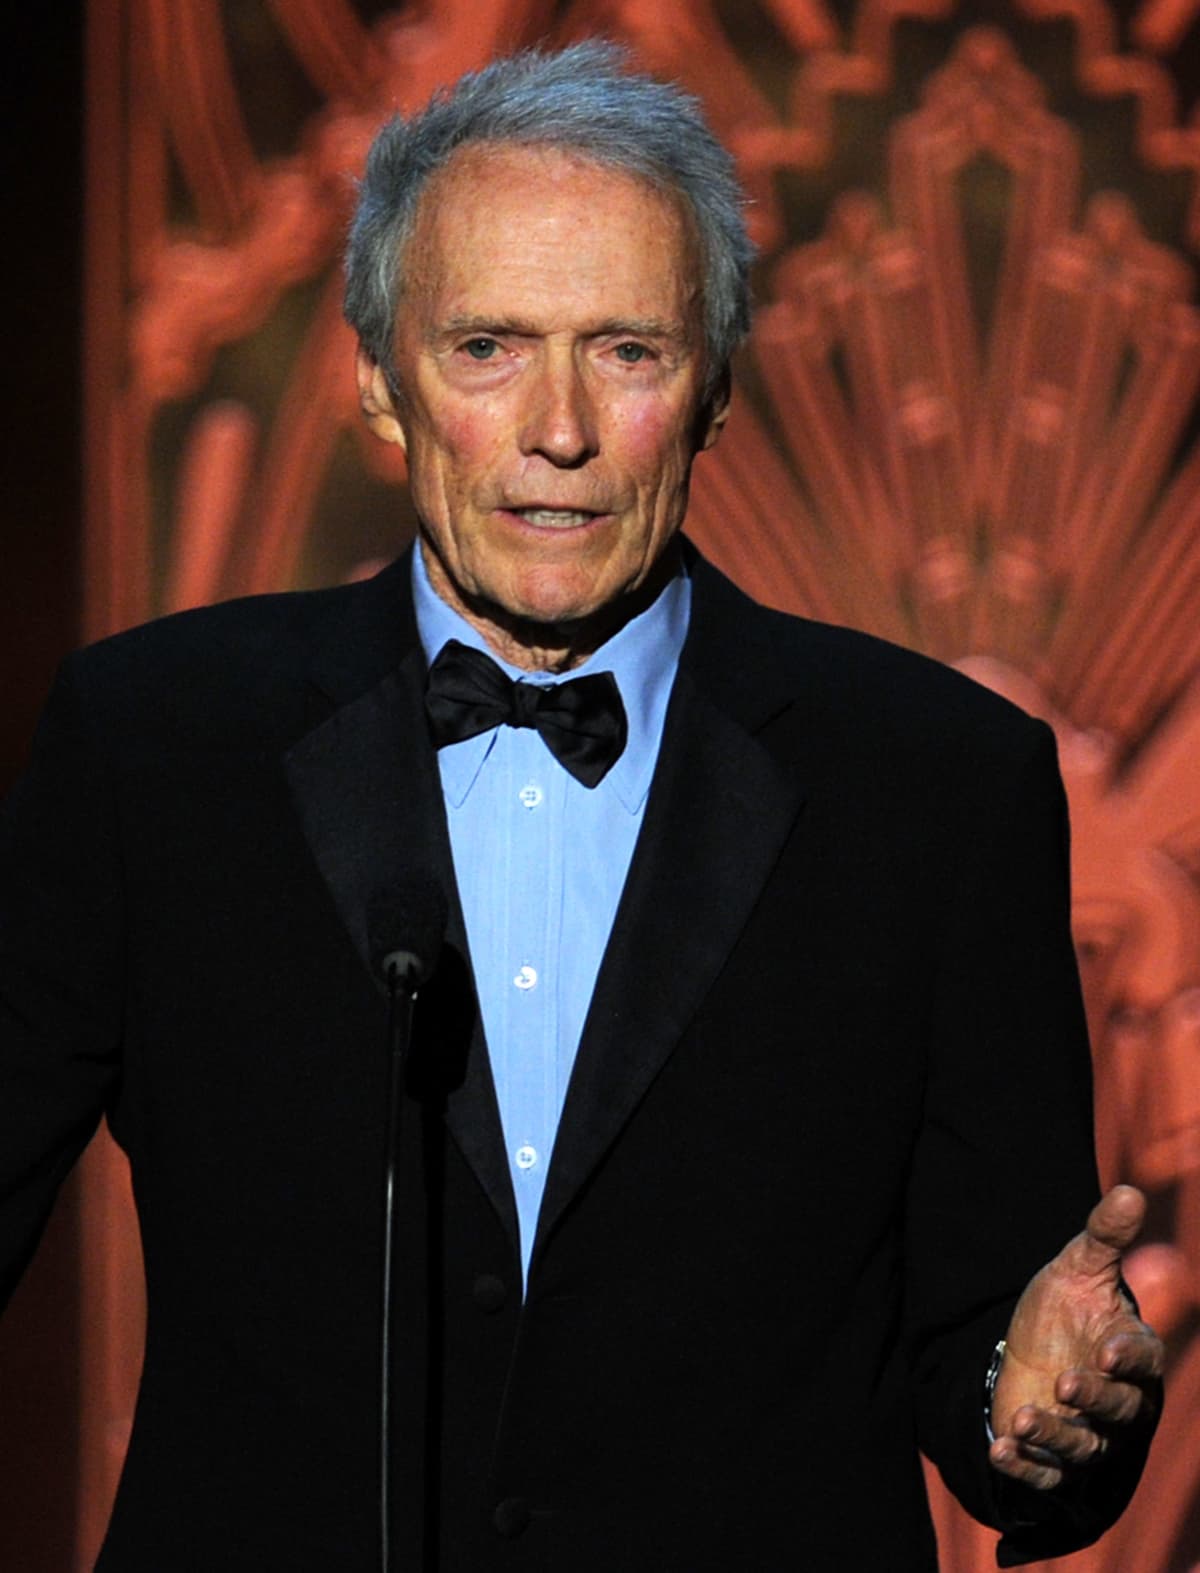 Clint Eastwood honored with The Screen Actors Guild Life Achievement Award (Photo by Jeffrey Mayer/WireImage)